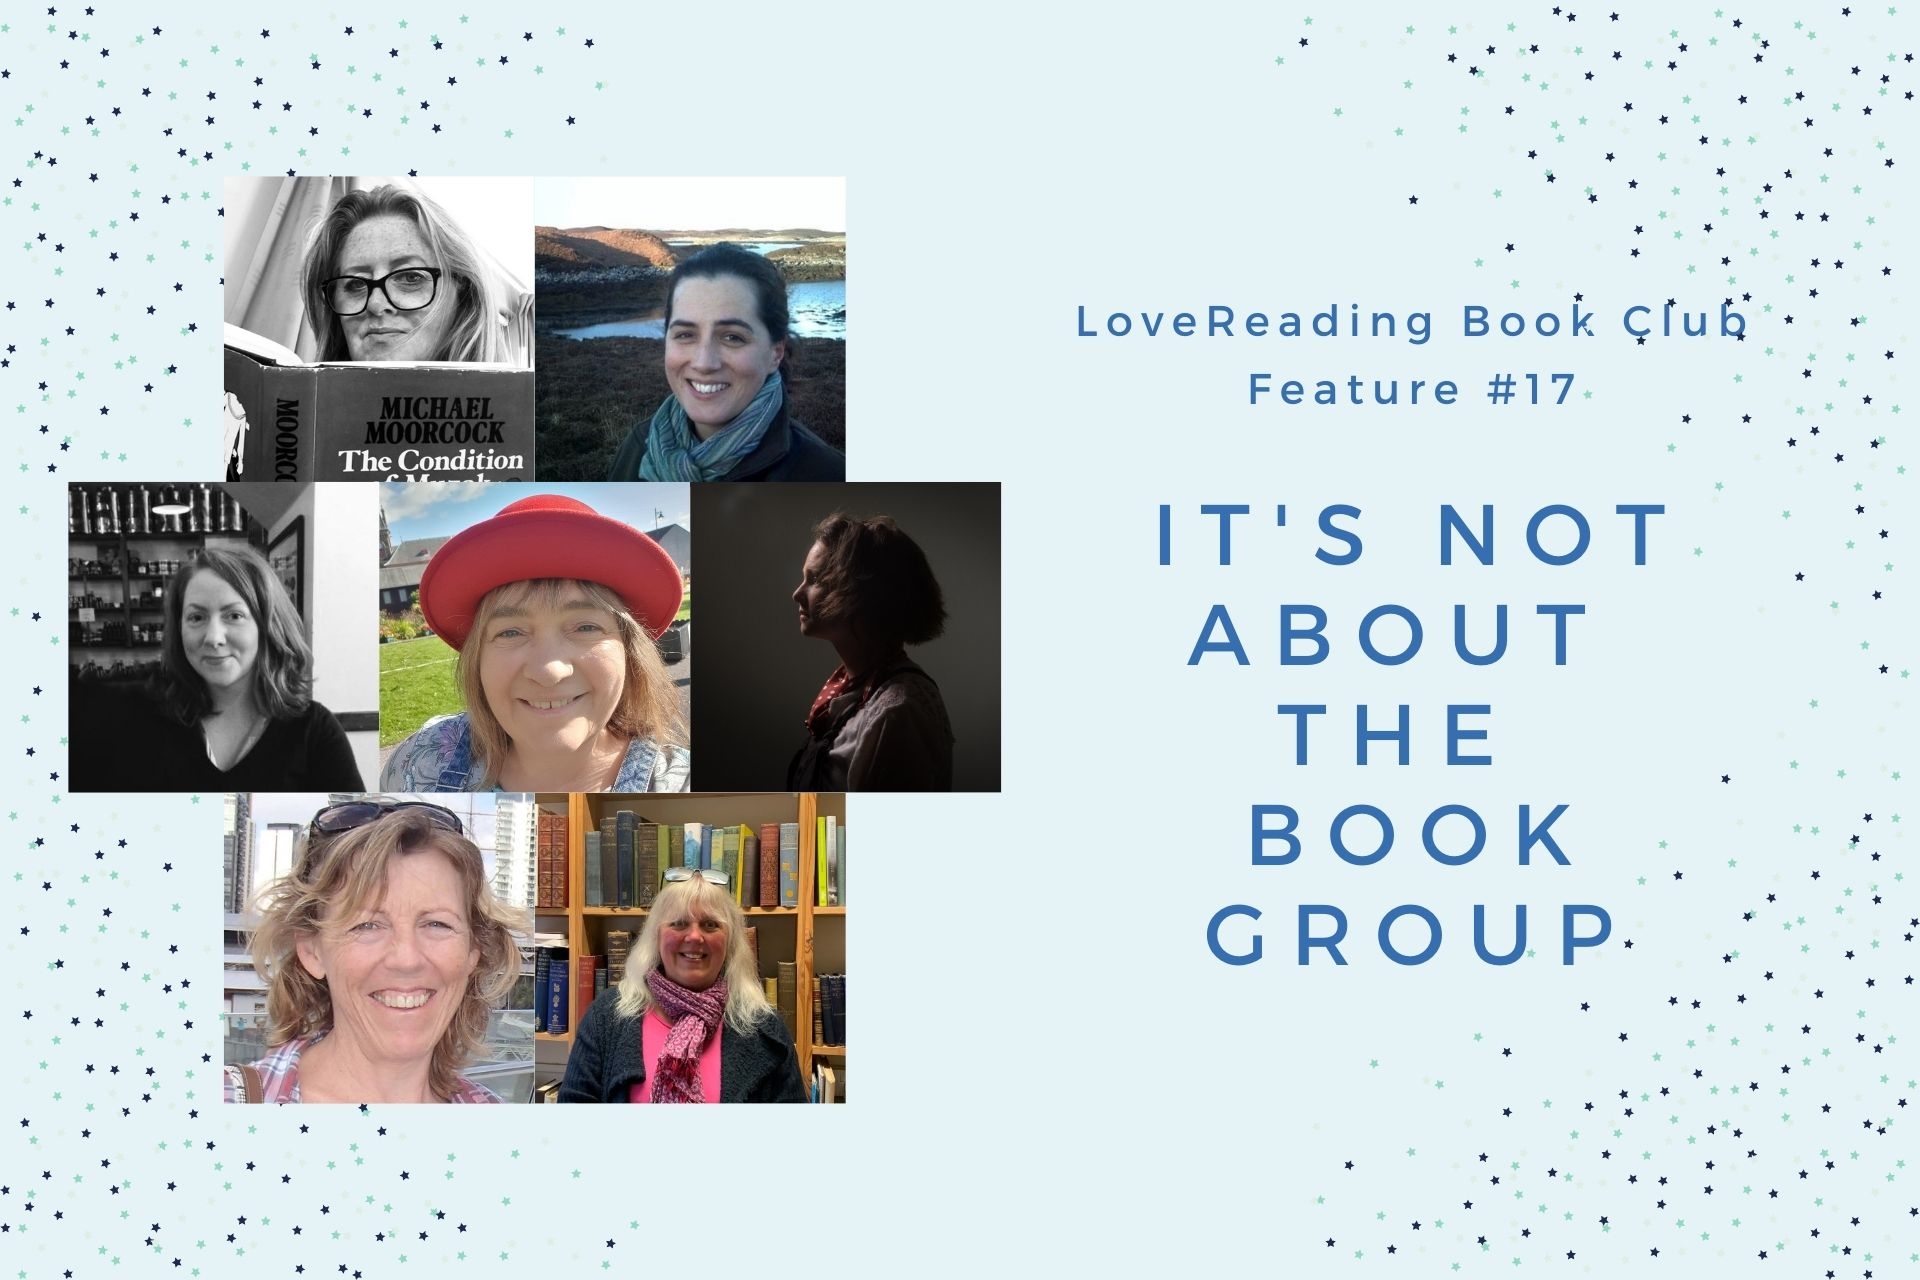 LoveReading Book Club Feature #17: It’s Not About The Book Group